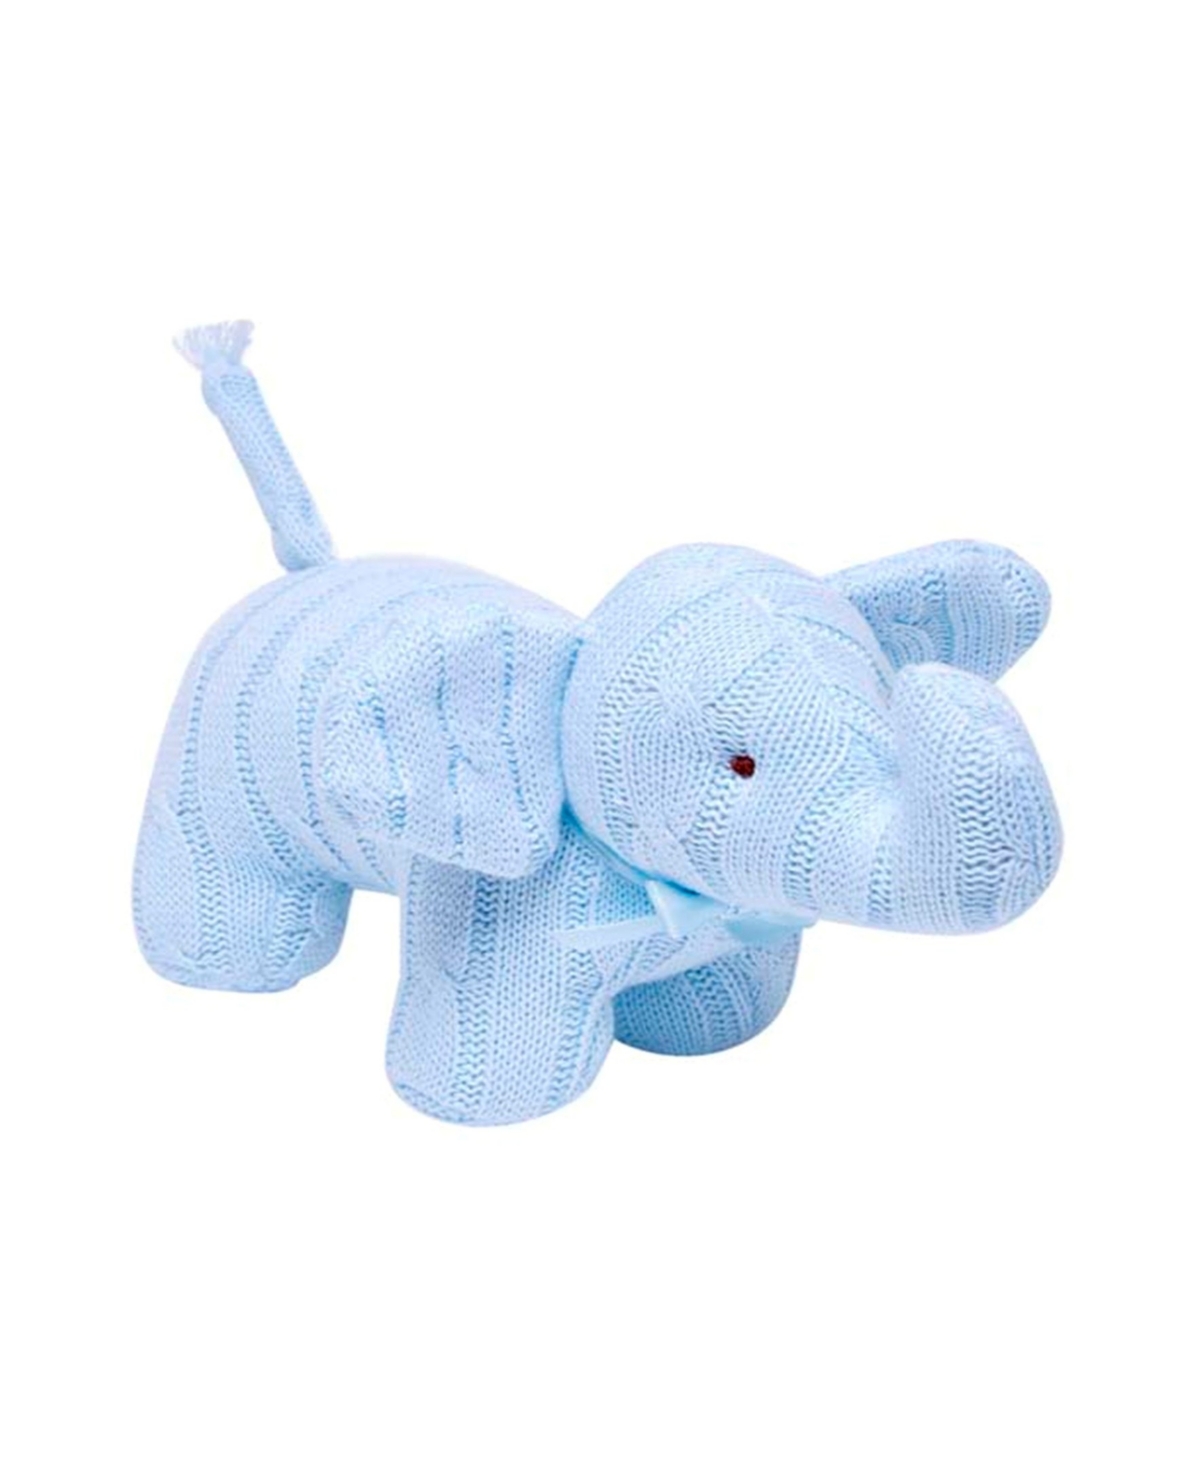 3 Stories Trading Baby Boys Or Baby Girls Cable Knit Snuggle Elephant In Blue